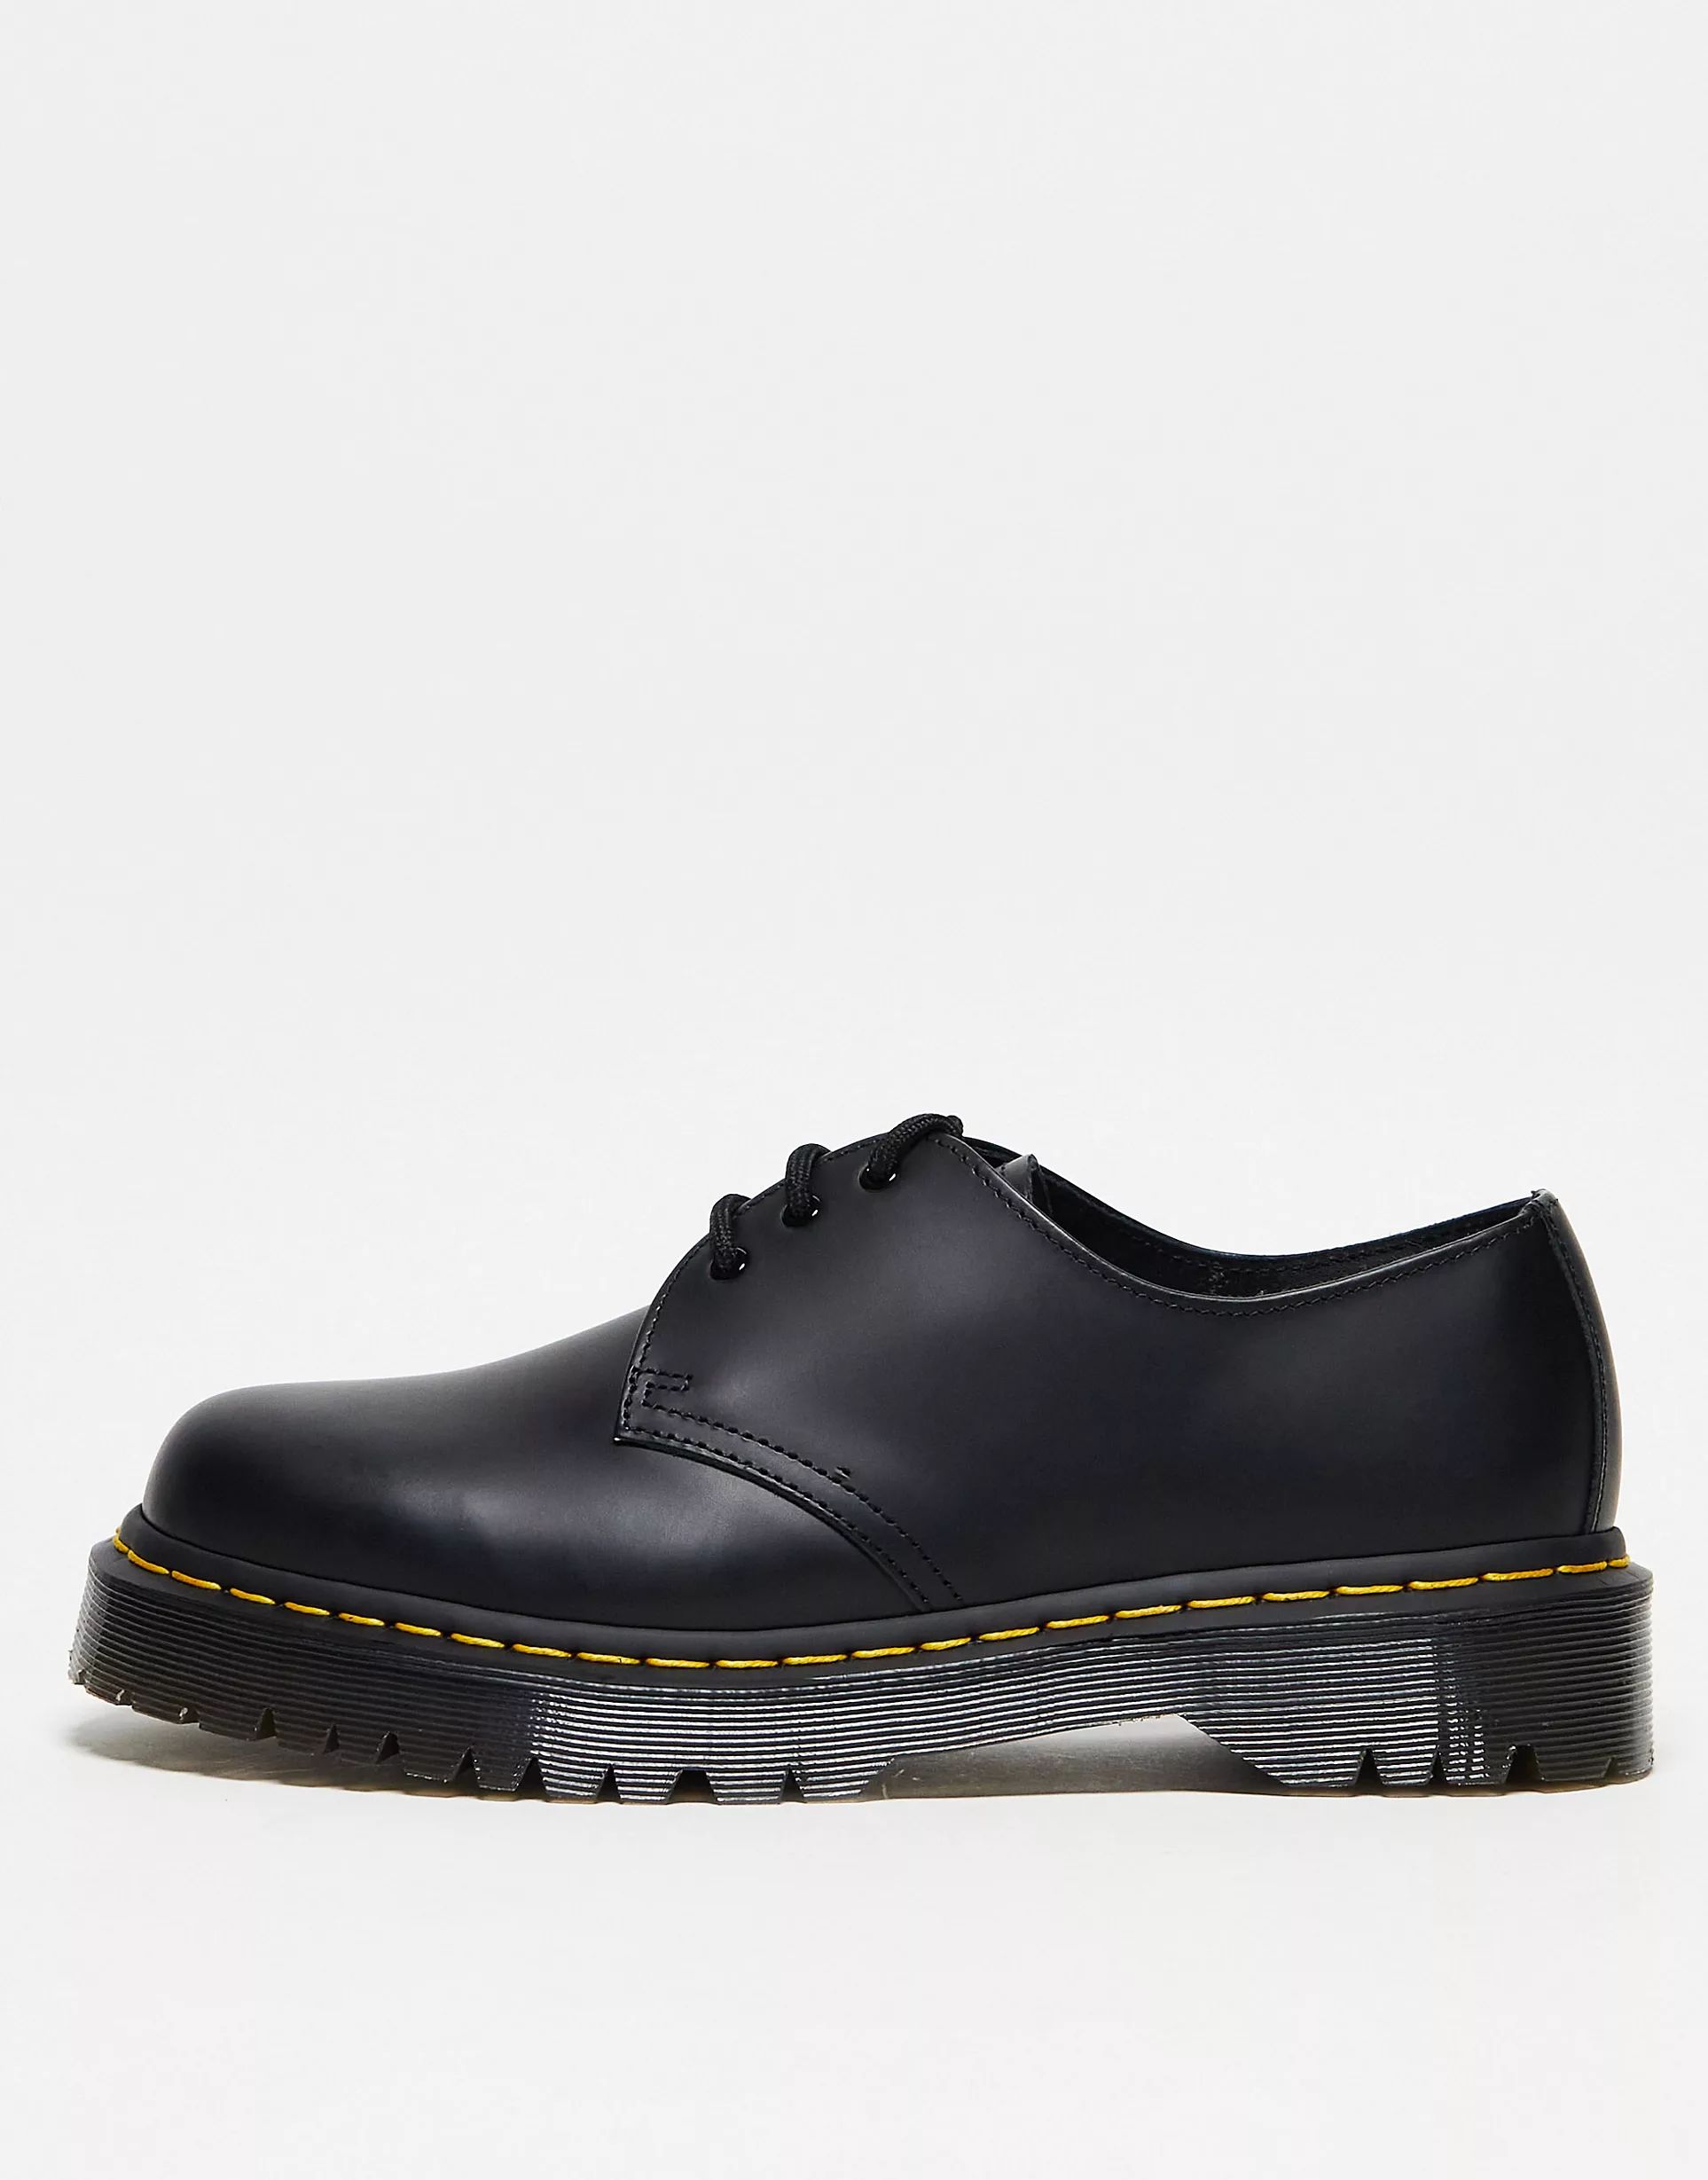 Dr Martens 1461 Bex 3 eye shoes in black smooth leather | ASOS (Global)